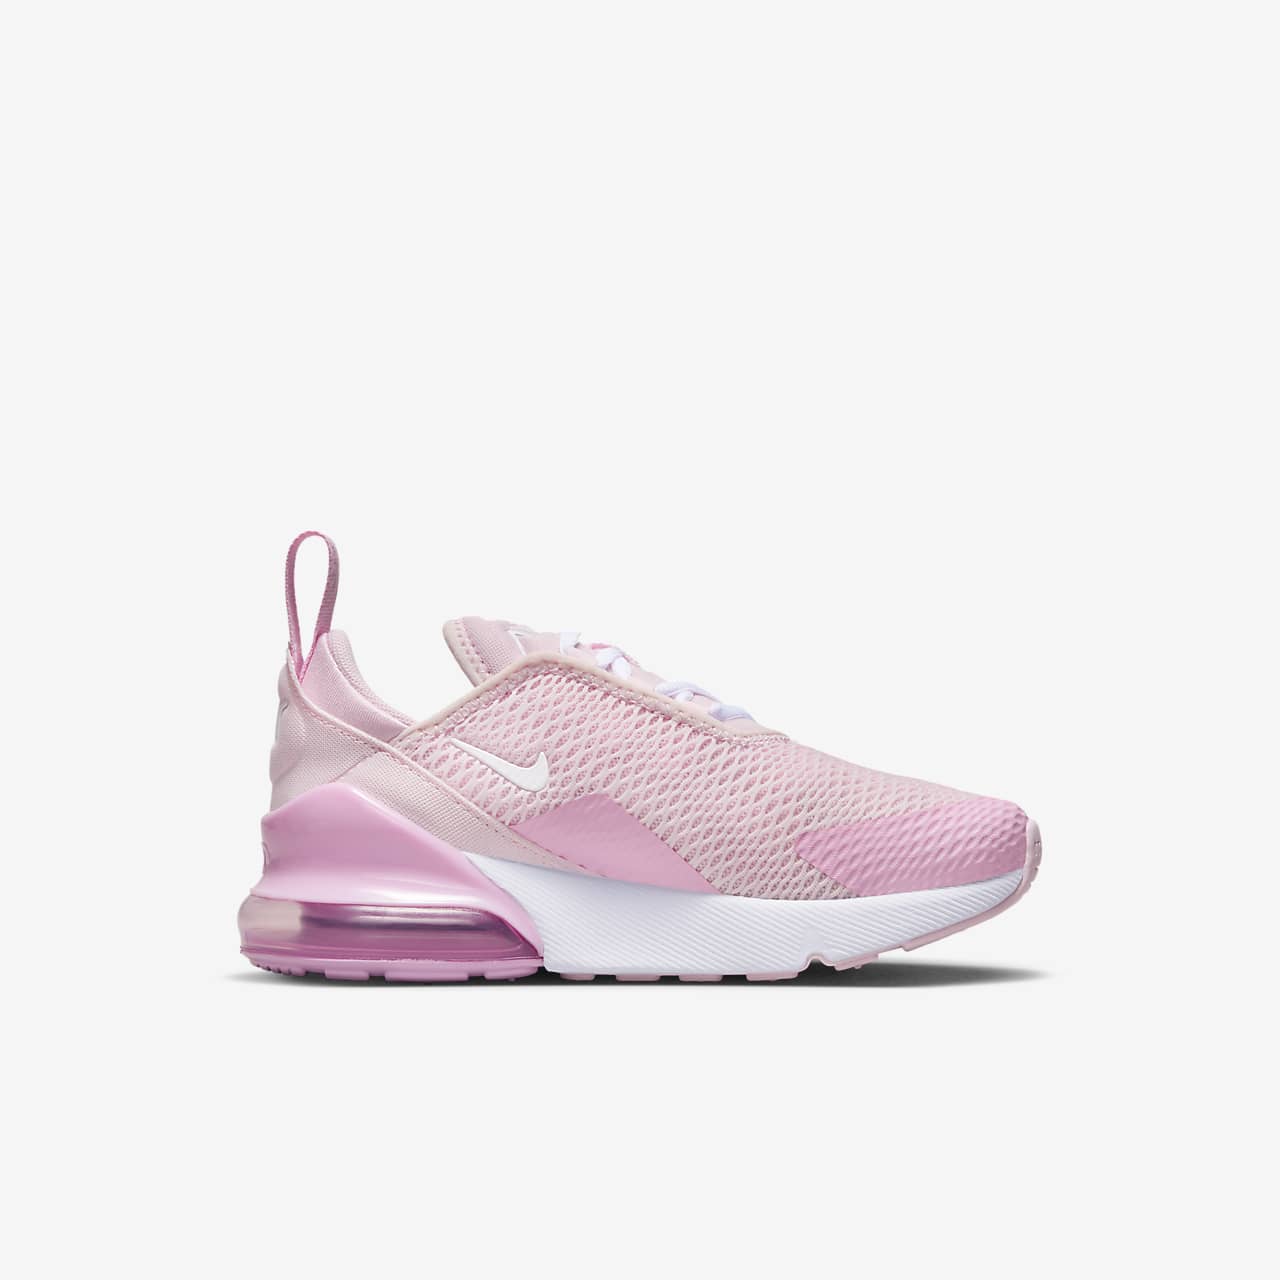 270 nike shoes pink